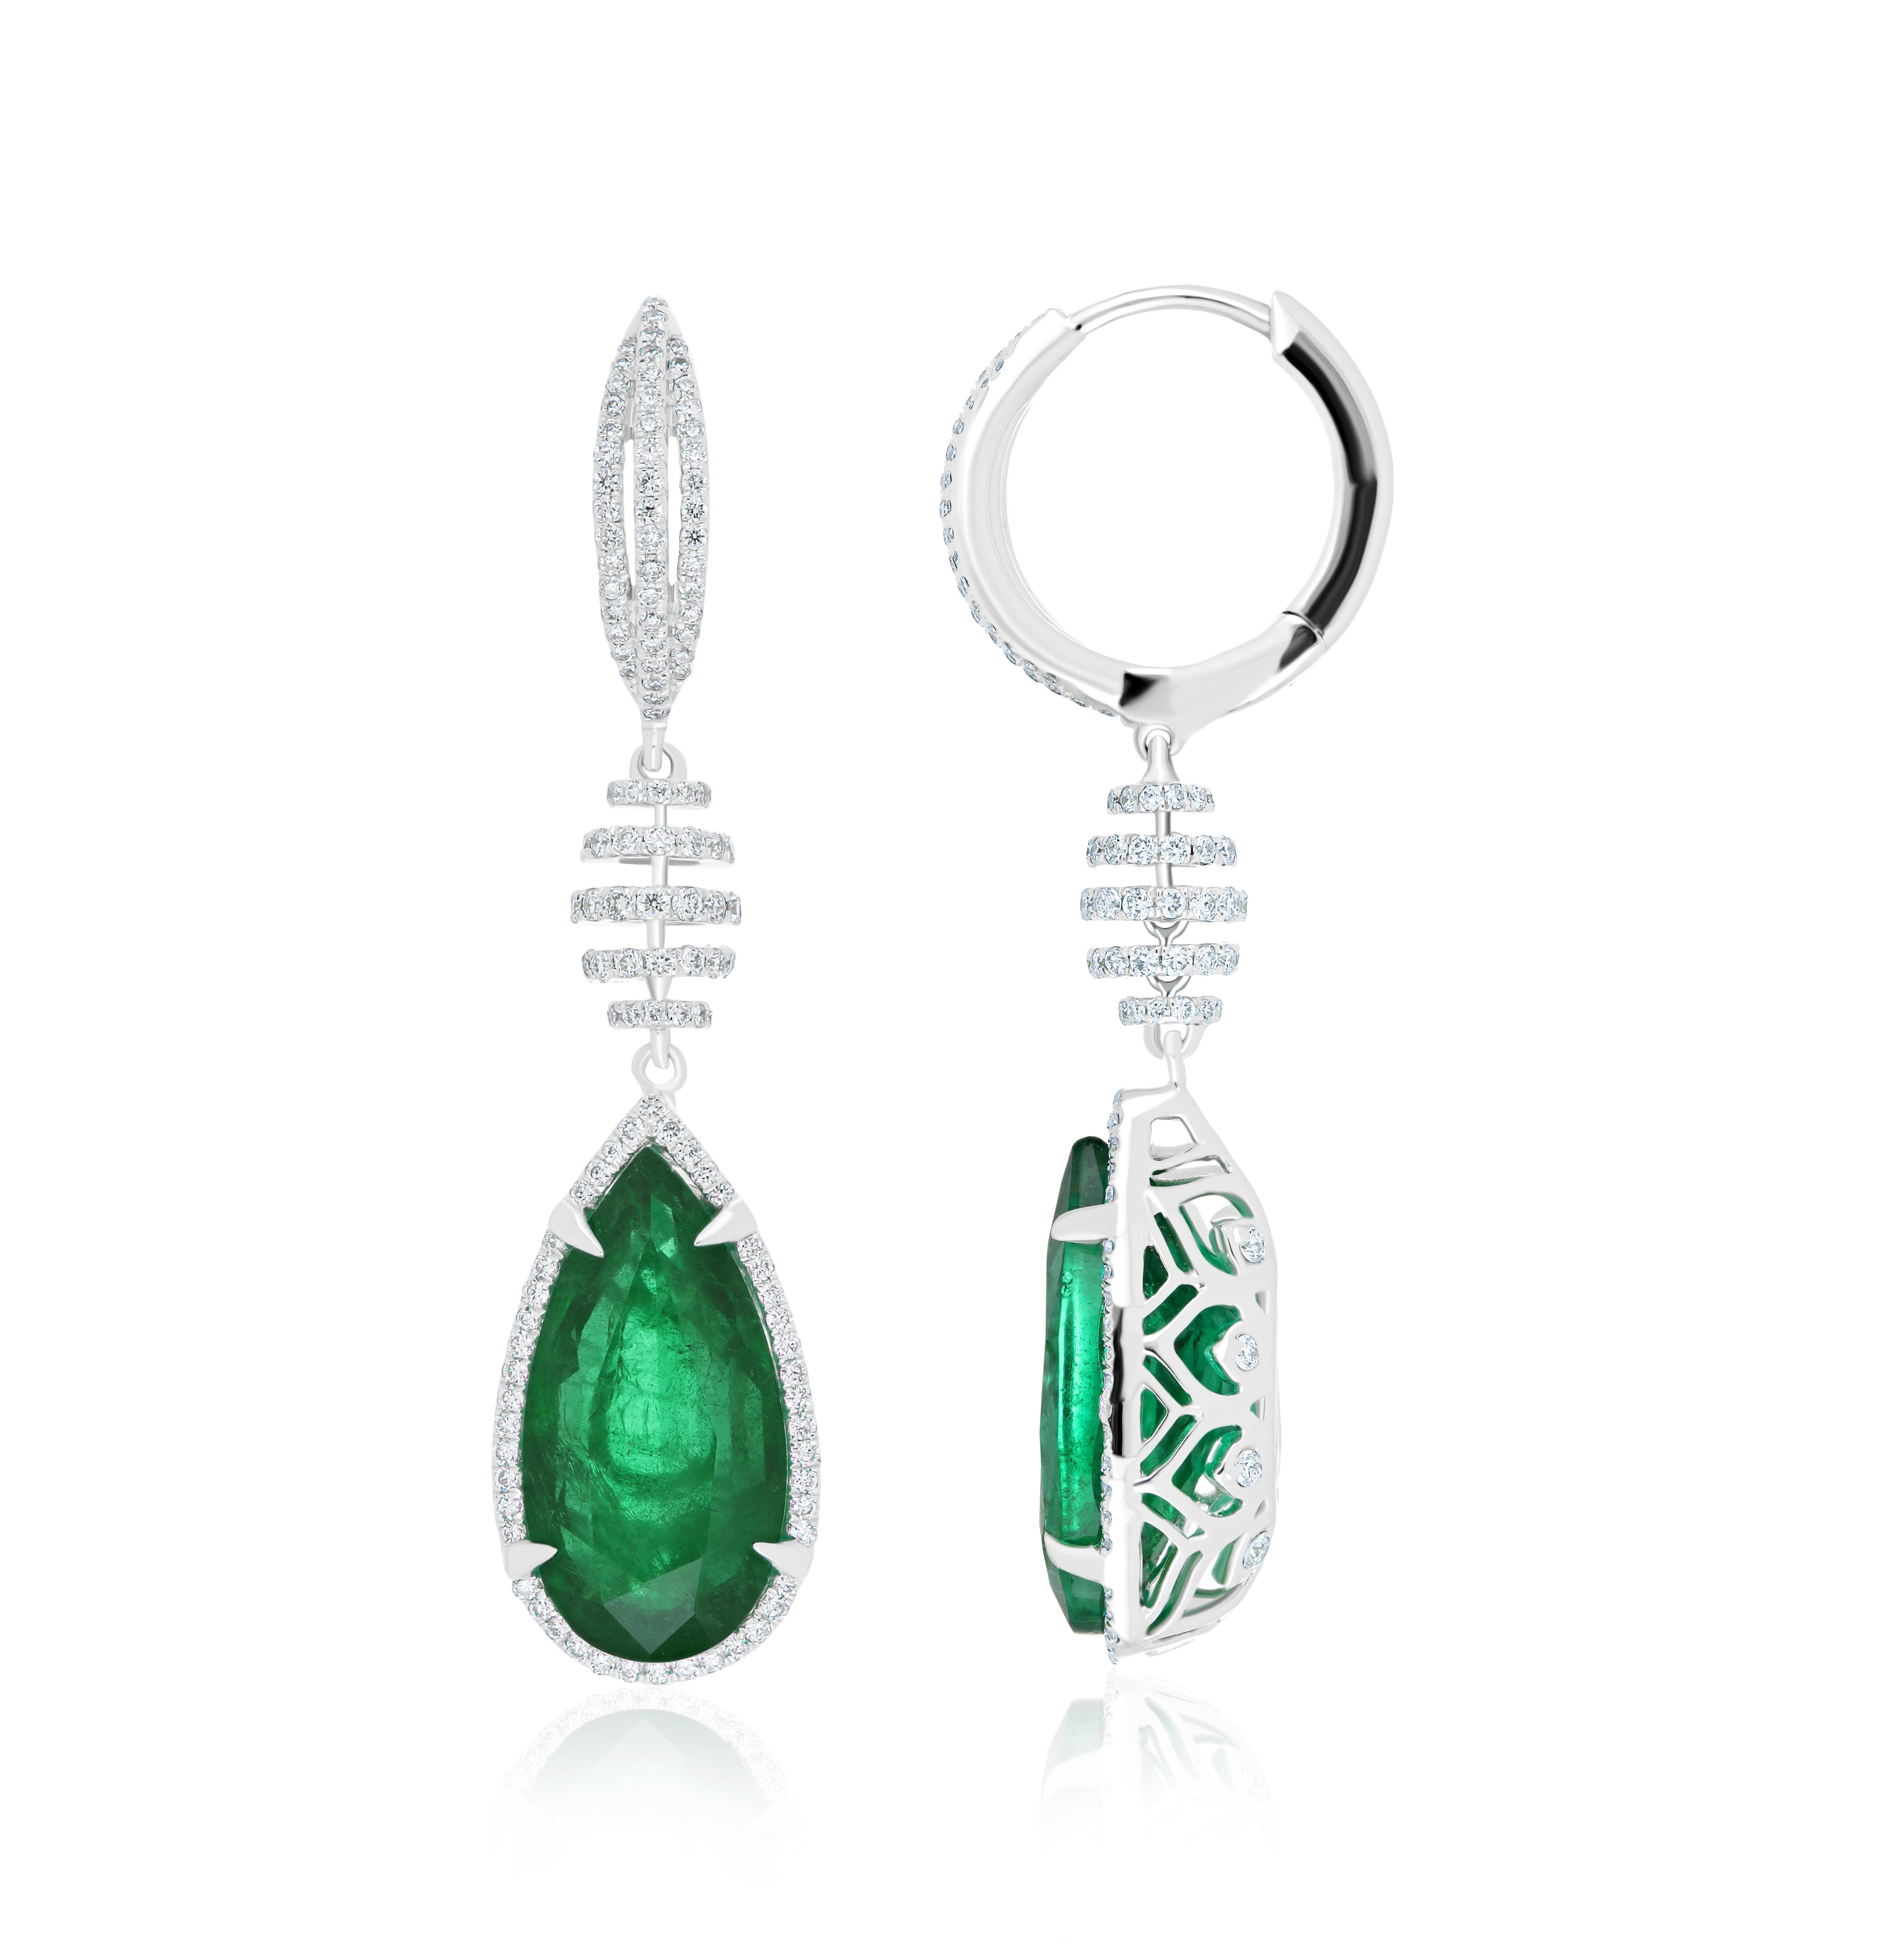 Elegant and Exquisitely detailed White Gold earrings, with 9.46 CT's (total approx.) Emerald Pear Shape, and accented with micro pave Diamonds, weighing approx.  0.99 CT's. (total approx.). total carat weight. Beautifully Hand-Crafted Earring in 18